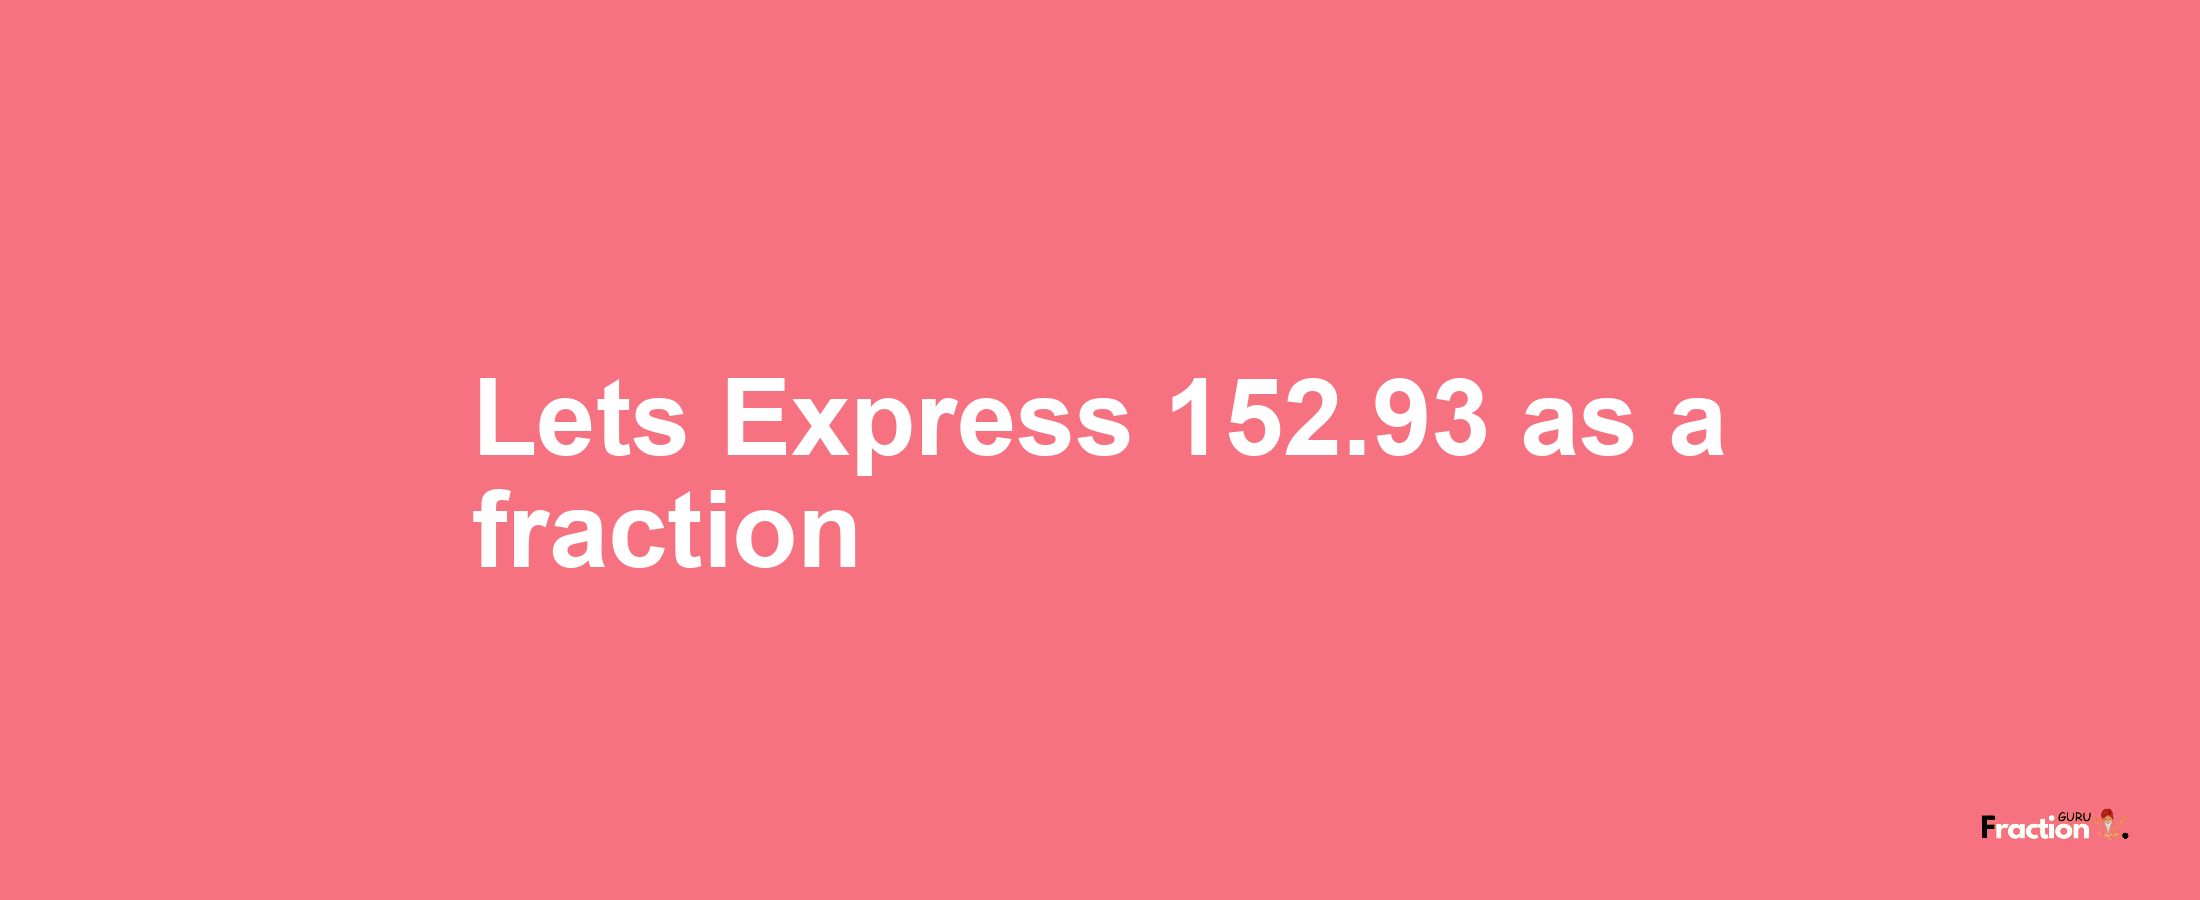 Lets Express 152.93 as afraction